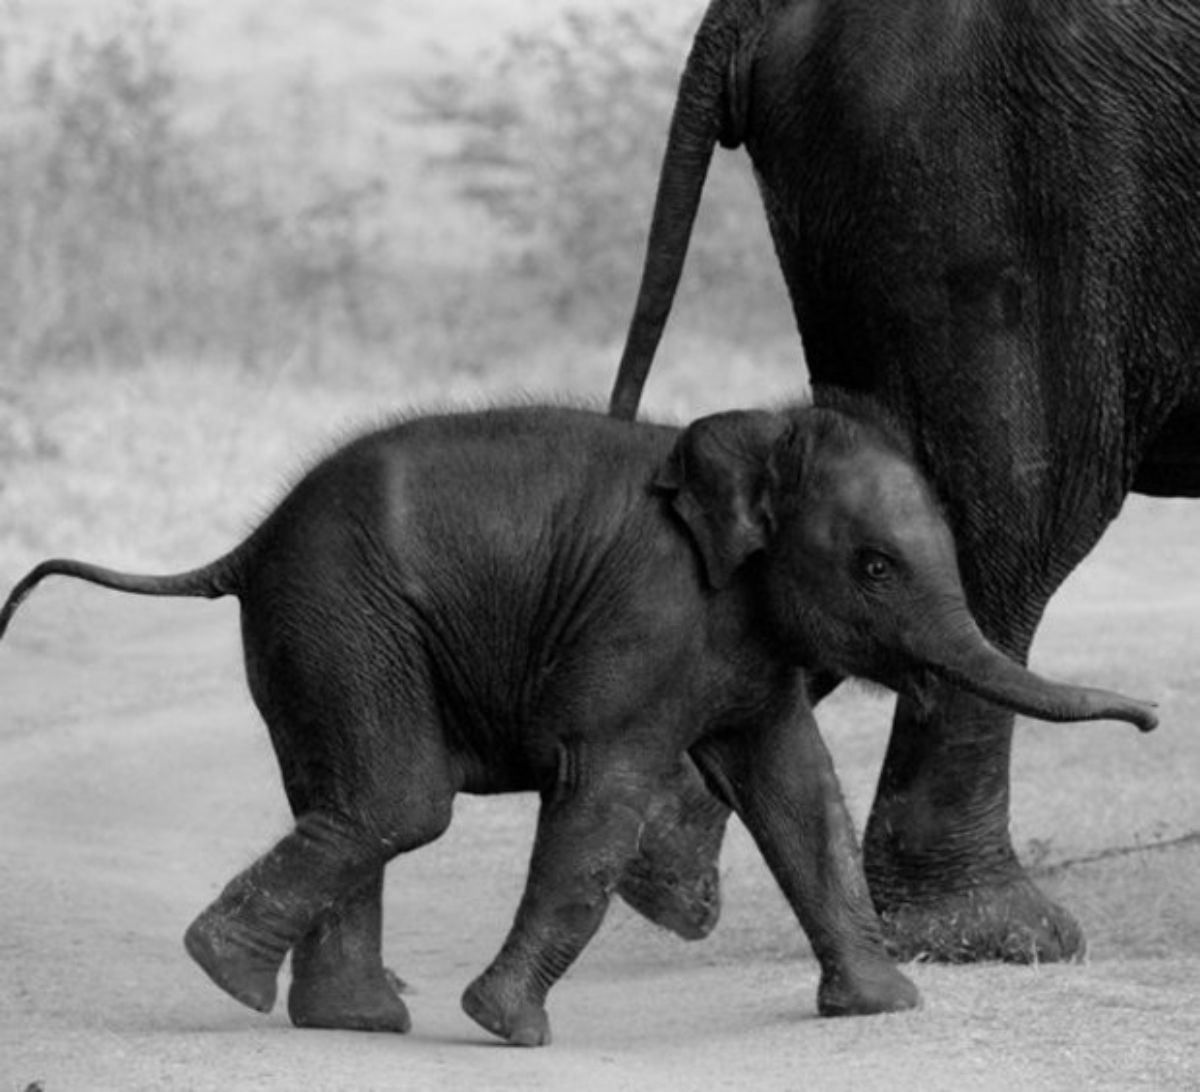 baby elephant running next to an adult elephant